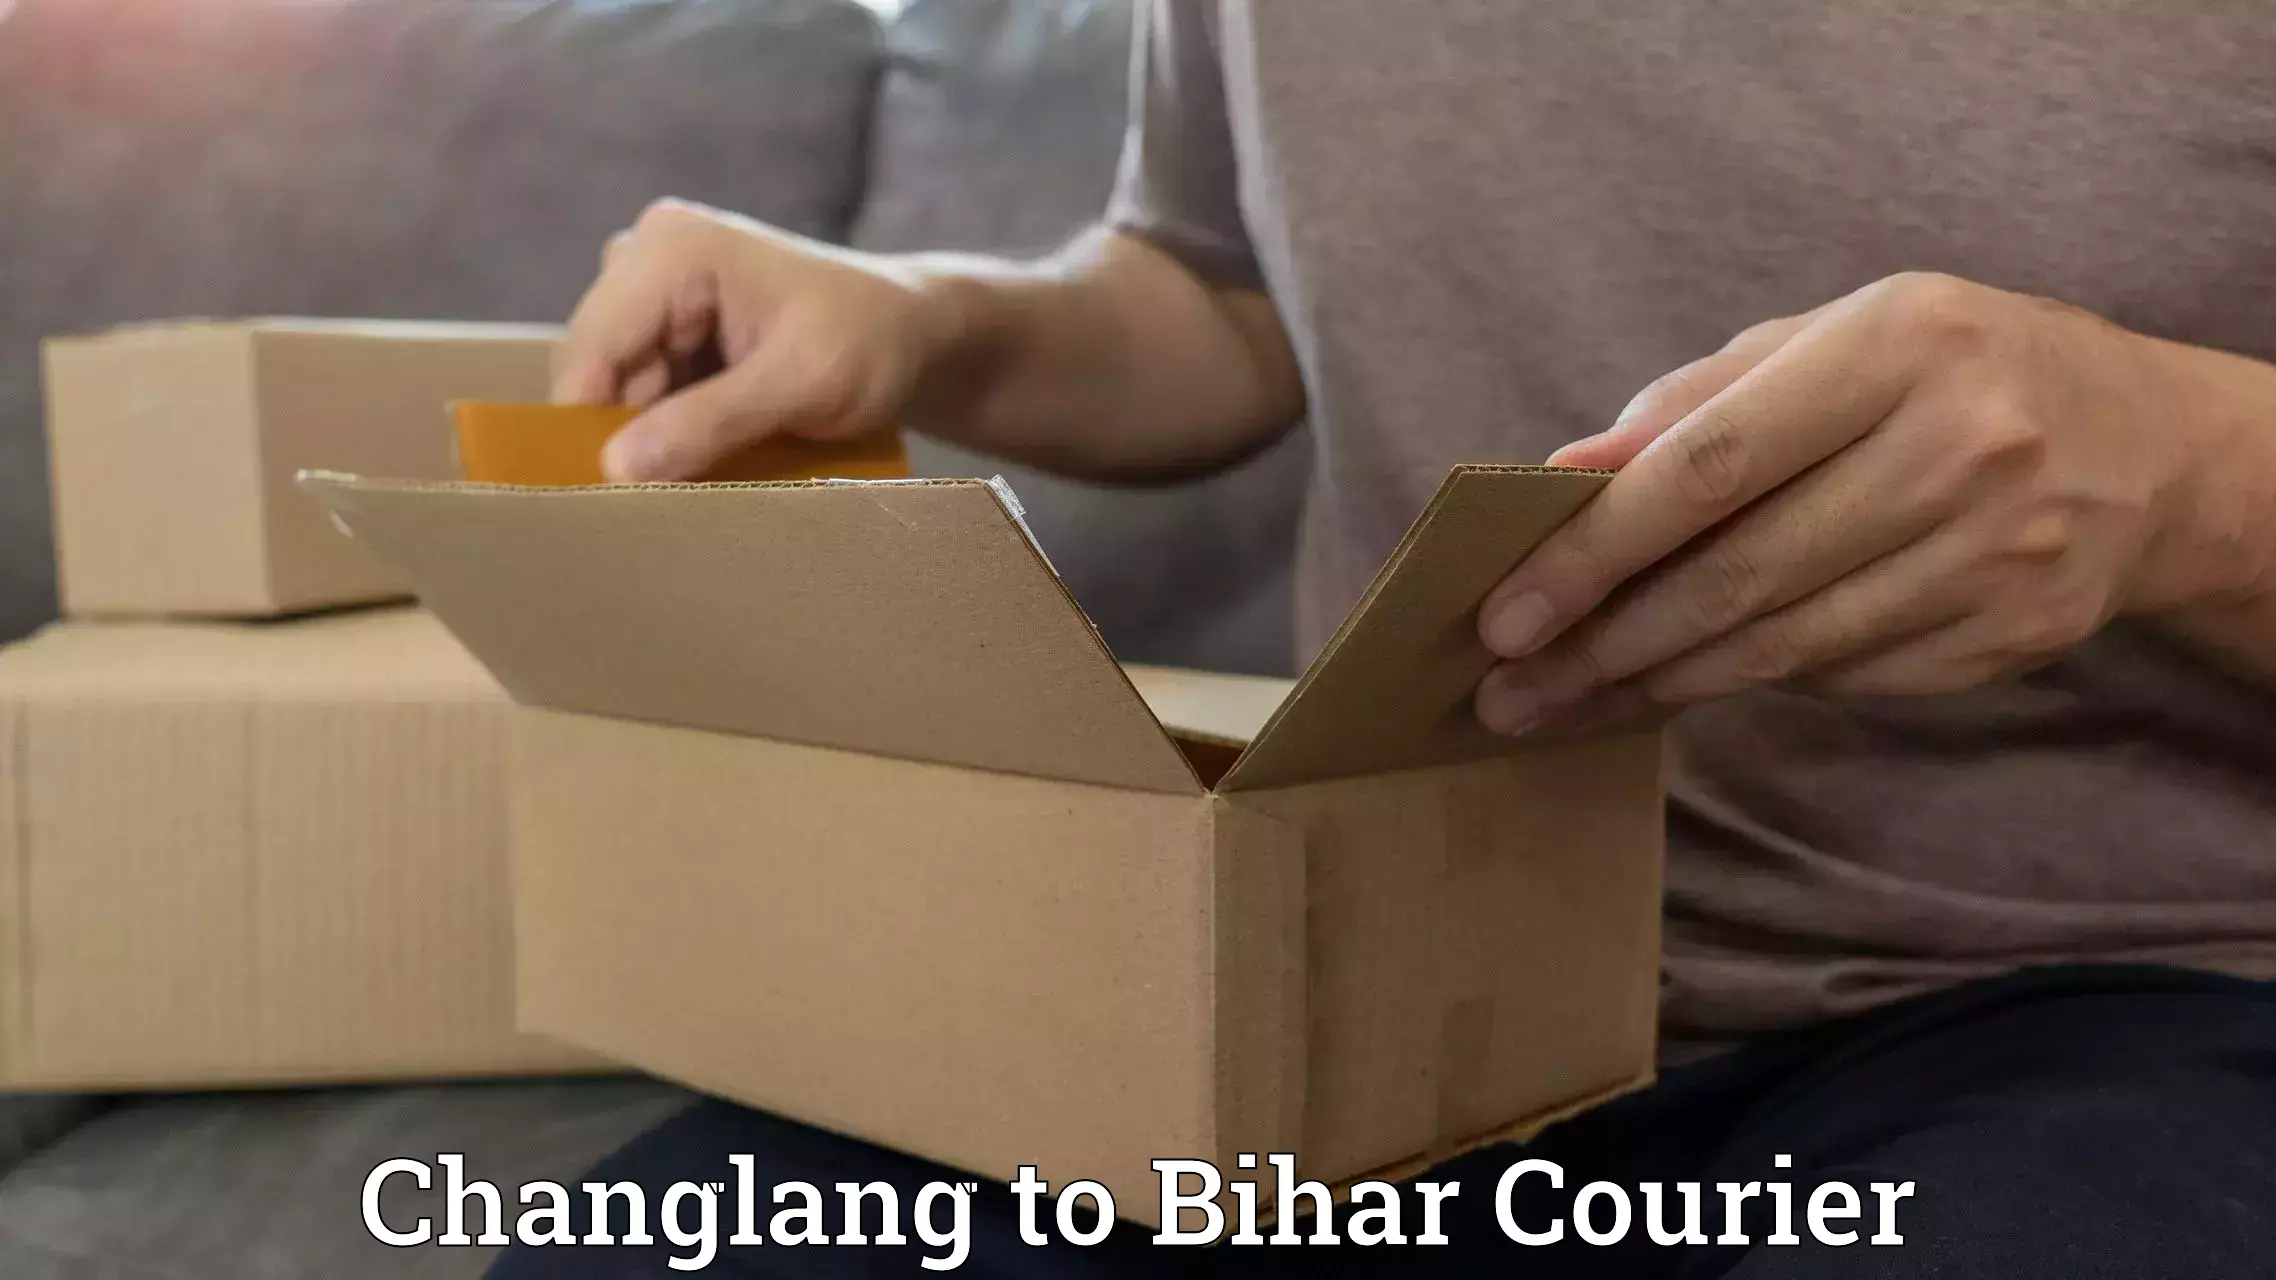 Global courier networks Changlang to Dehri